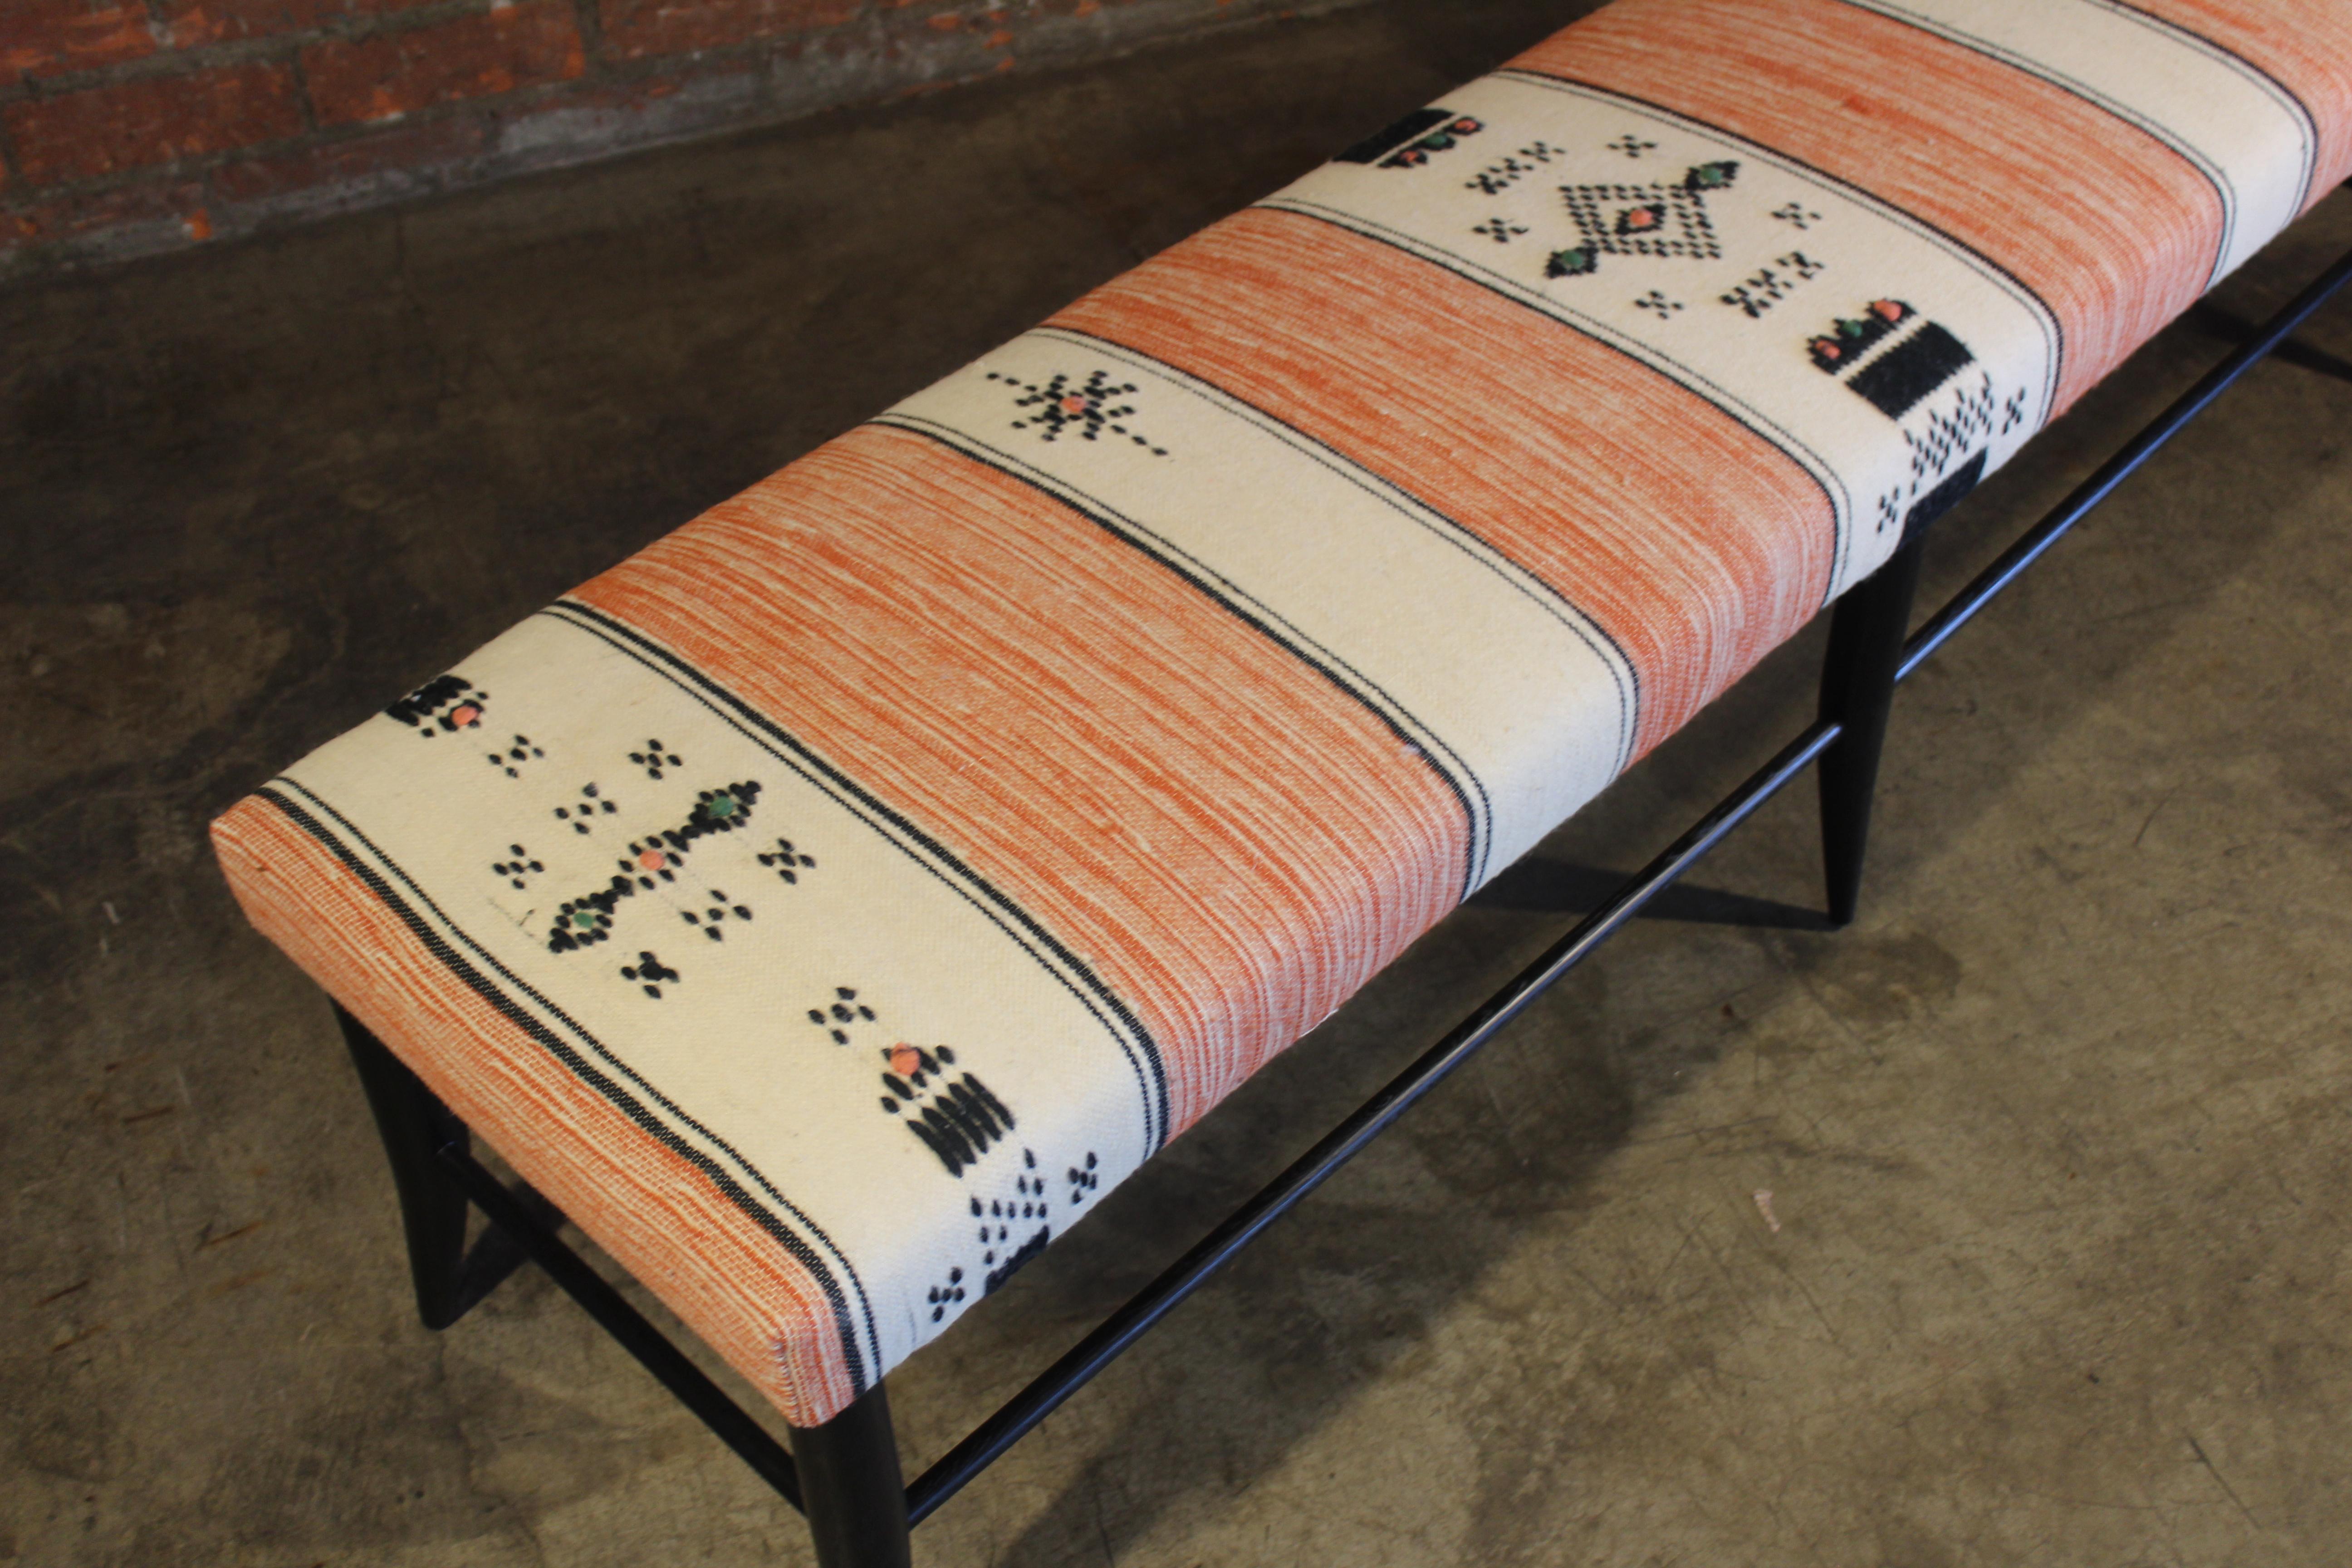 Contemporary Oak Bench Upholstered in a Vintage 1970s Moroccan Wool Textile